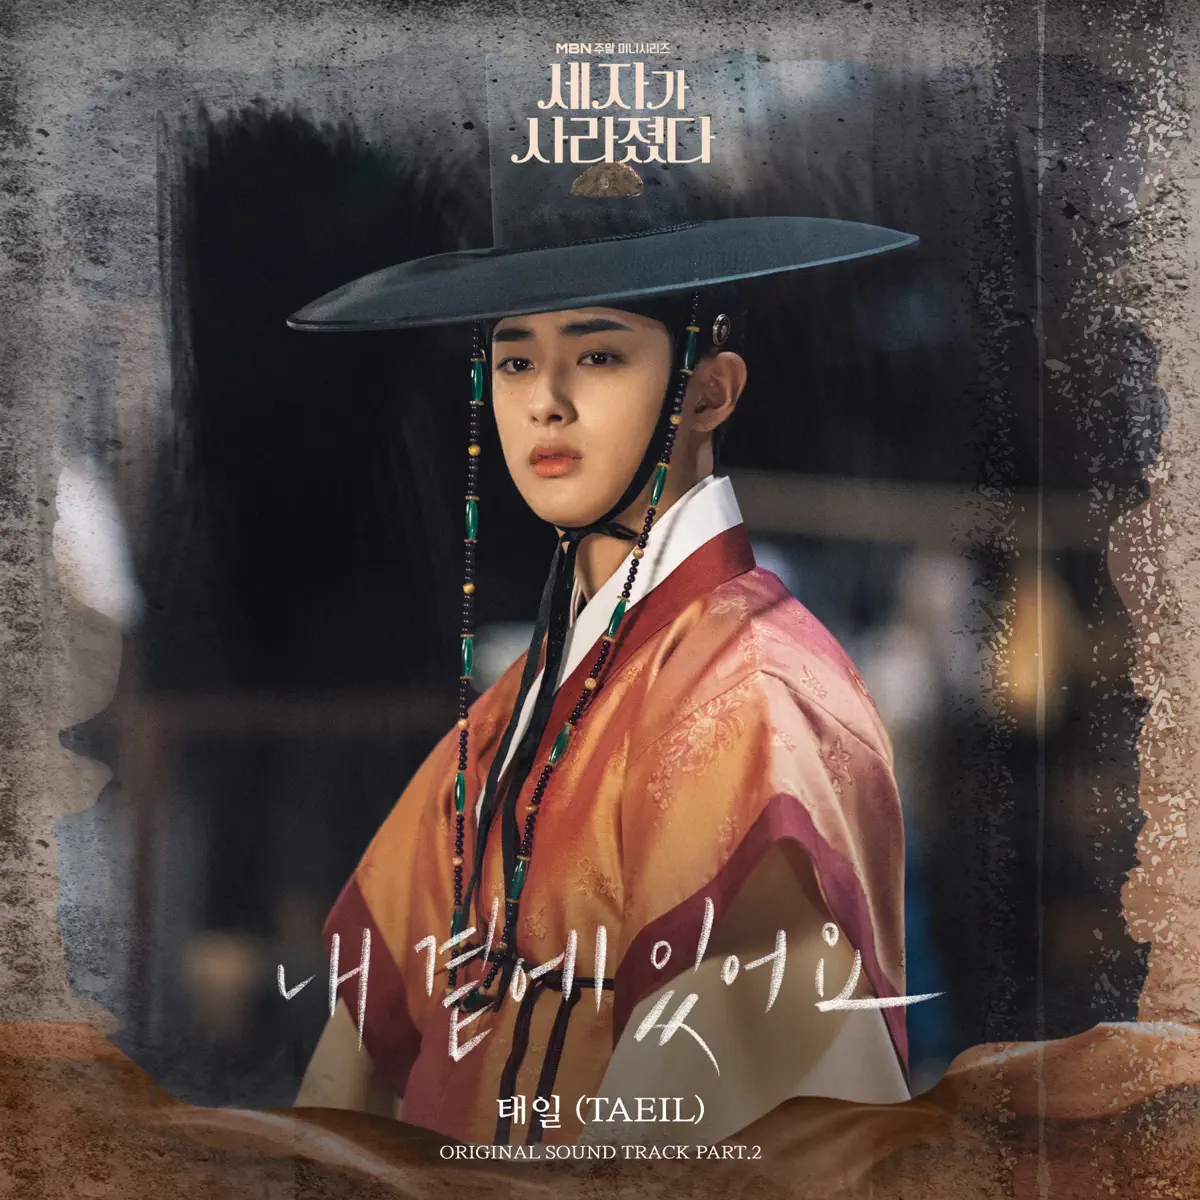 TAEIL - Missing Crown Prince (Original Television Soundtrack) Pt. 2 - Stay By My Side - Single (2024) [iTunes Plus AAC M4A]-新房子